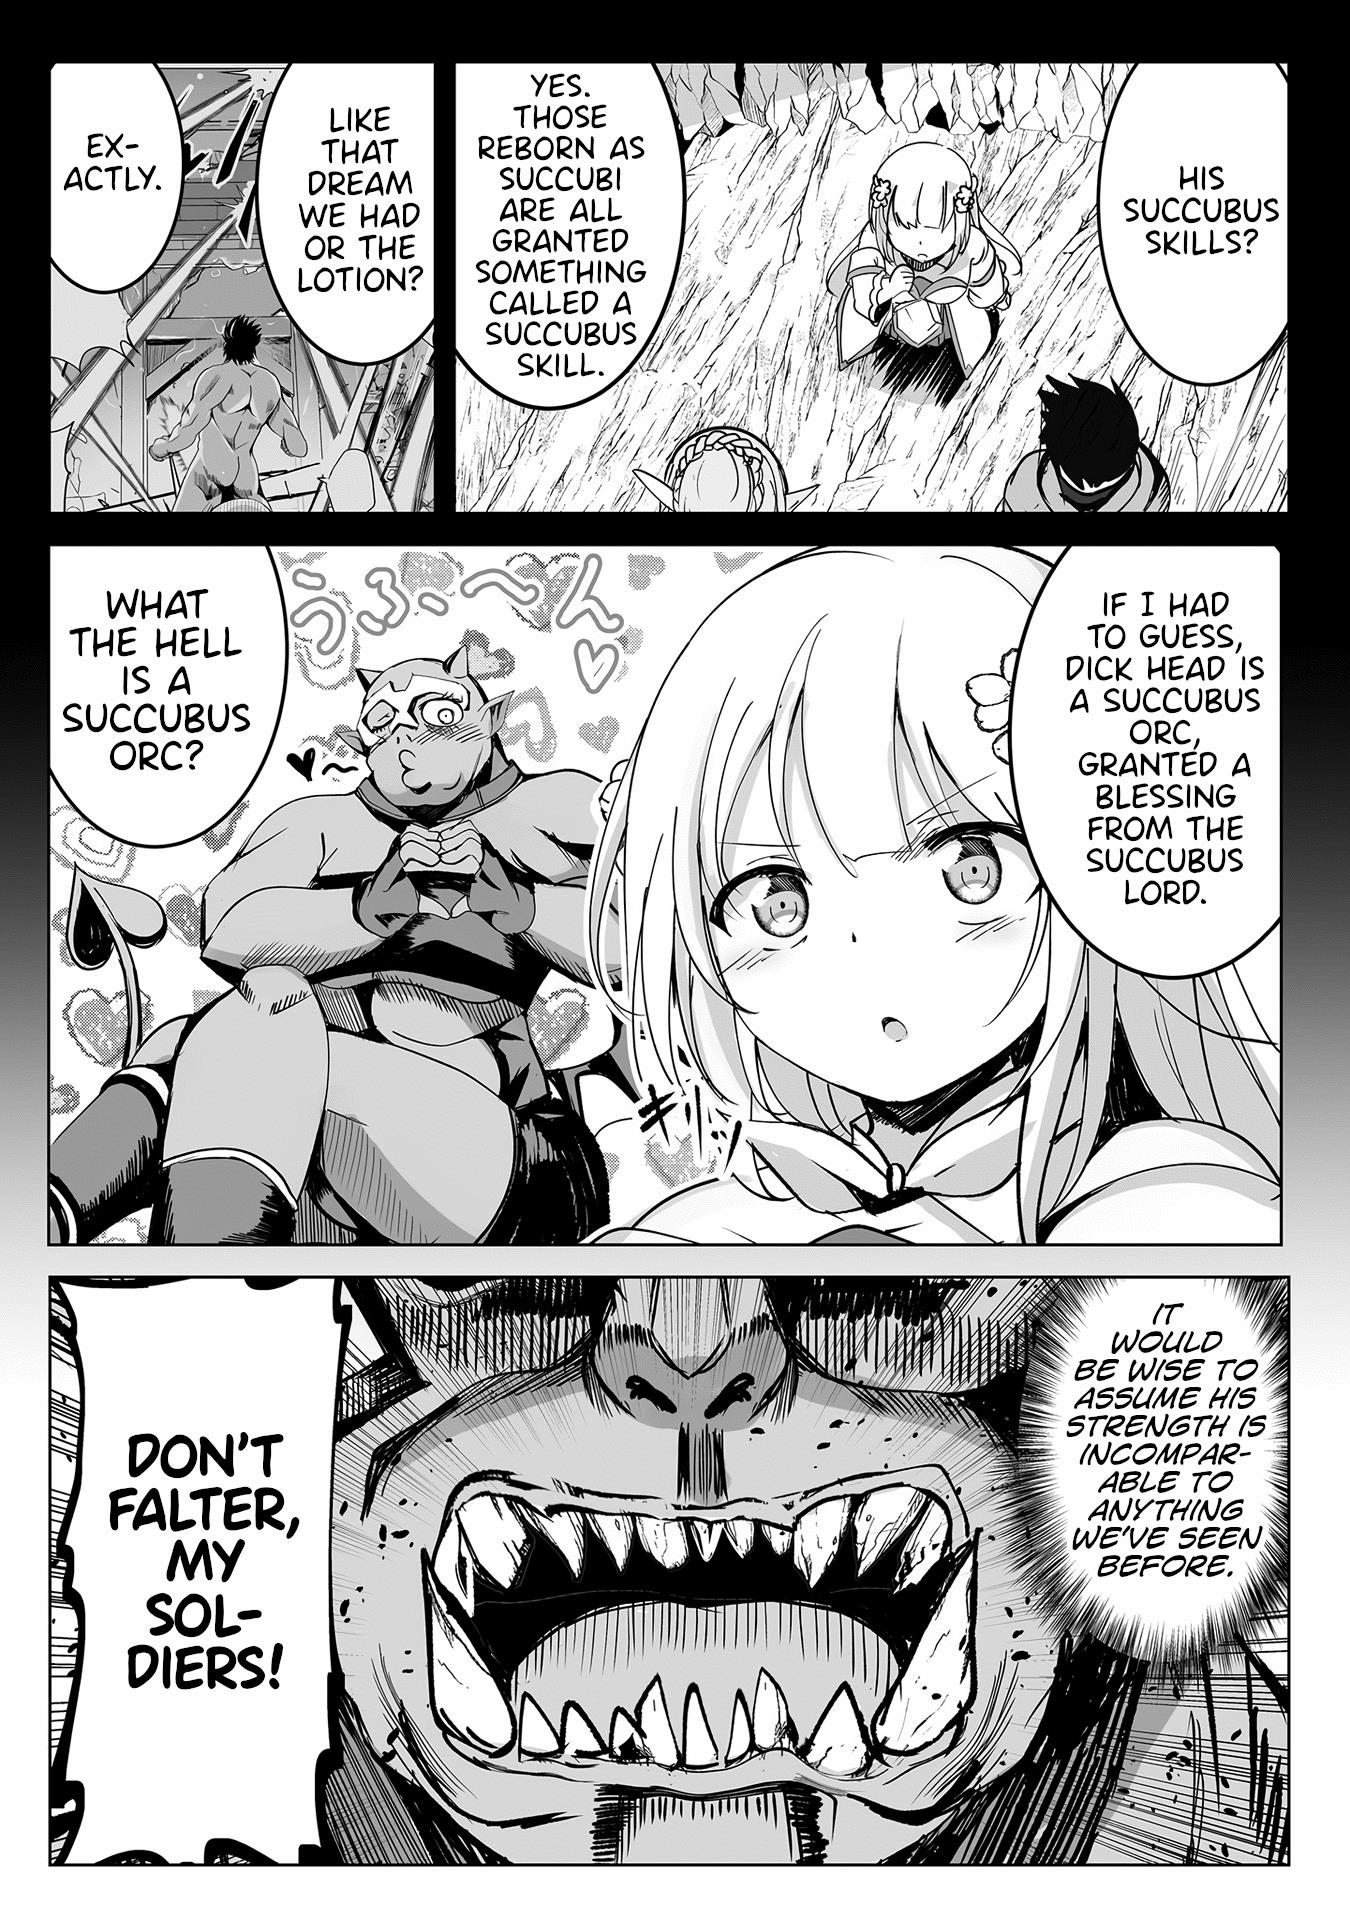 Dunking On Succubi In Another World Vol.3 Chapter 14: Jack The Raper And The Nipple Warrior - Picture 2